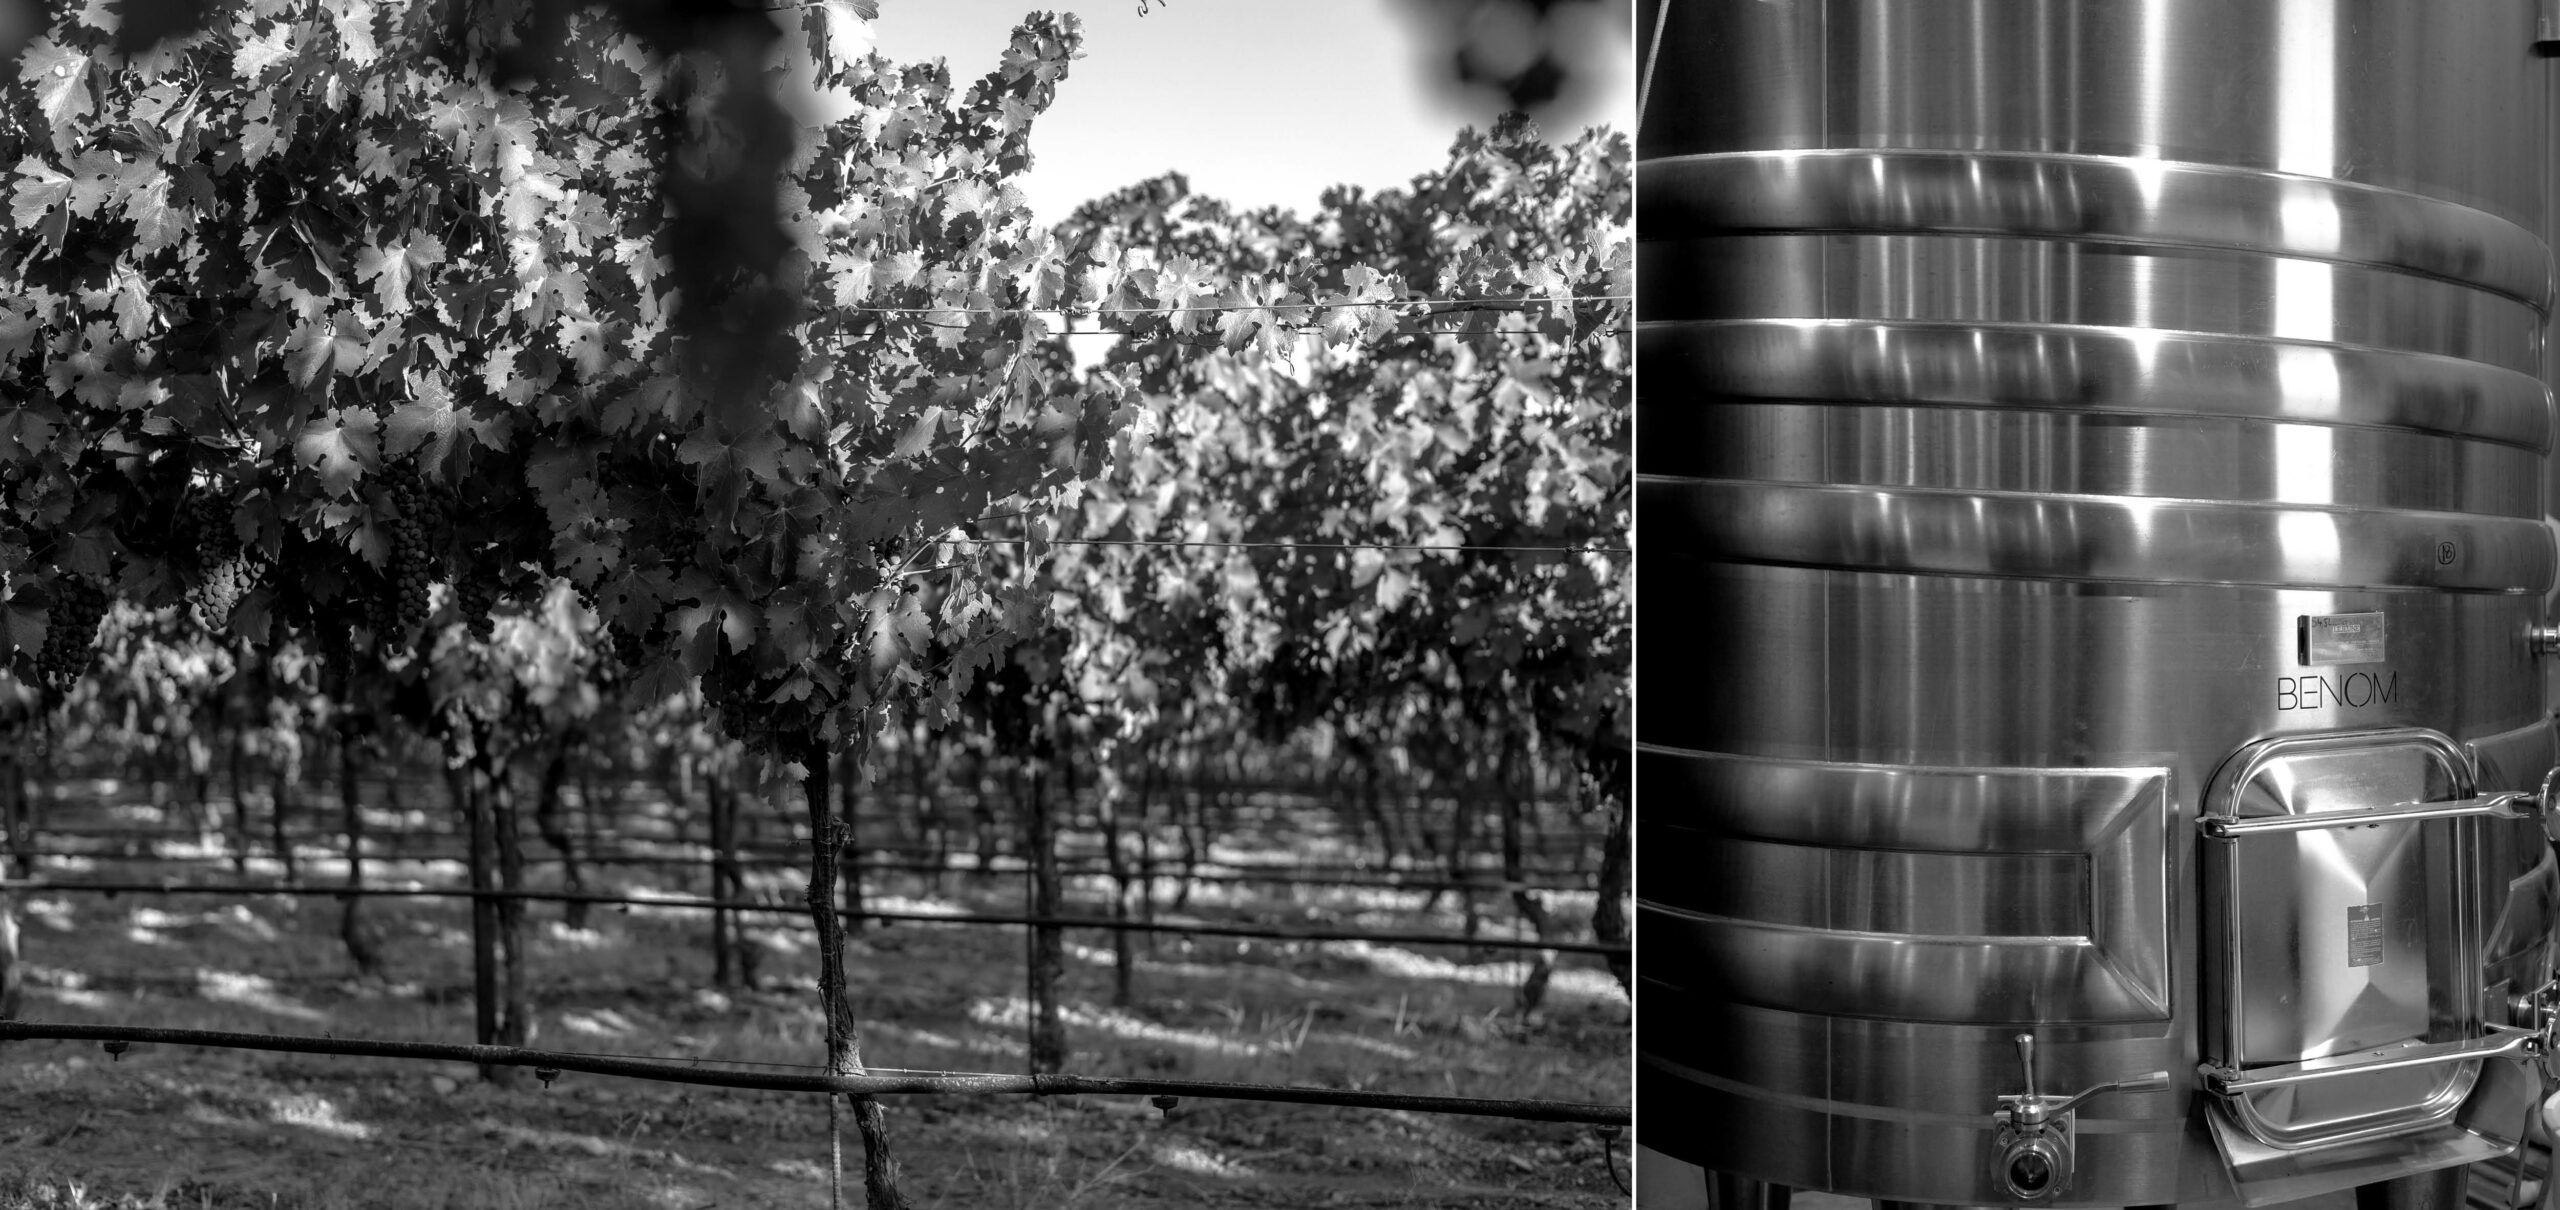 Two photos: left- a Paso Robles wine vine, right- a stainless steel tank